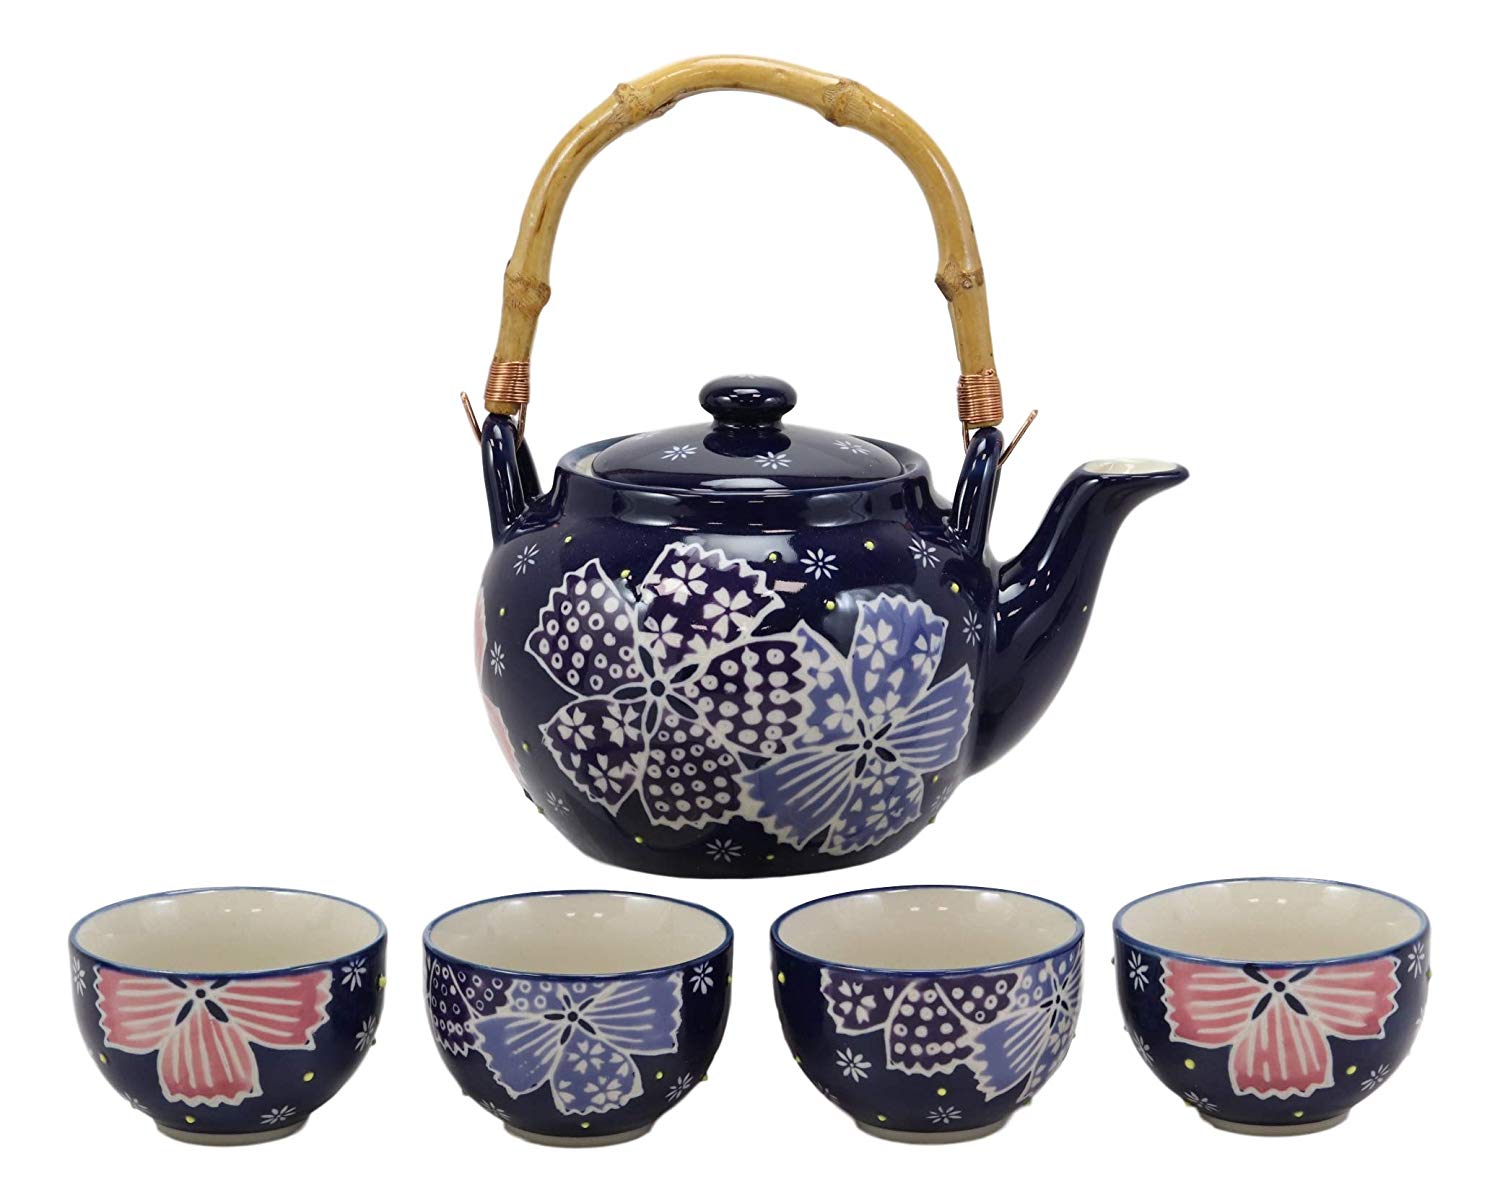 Blue Winter Frost Colorful Large Floral Blooms 25oz Tea Pot With 4 Cups Set - image 2 of 7